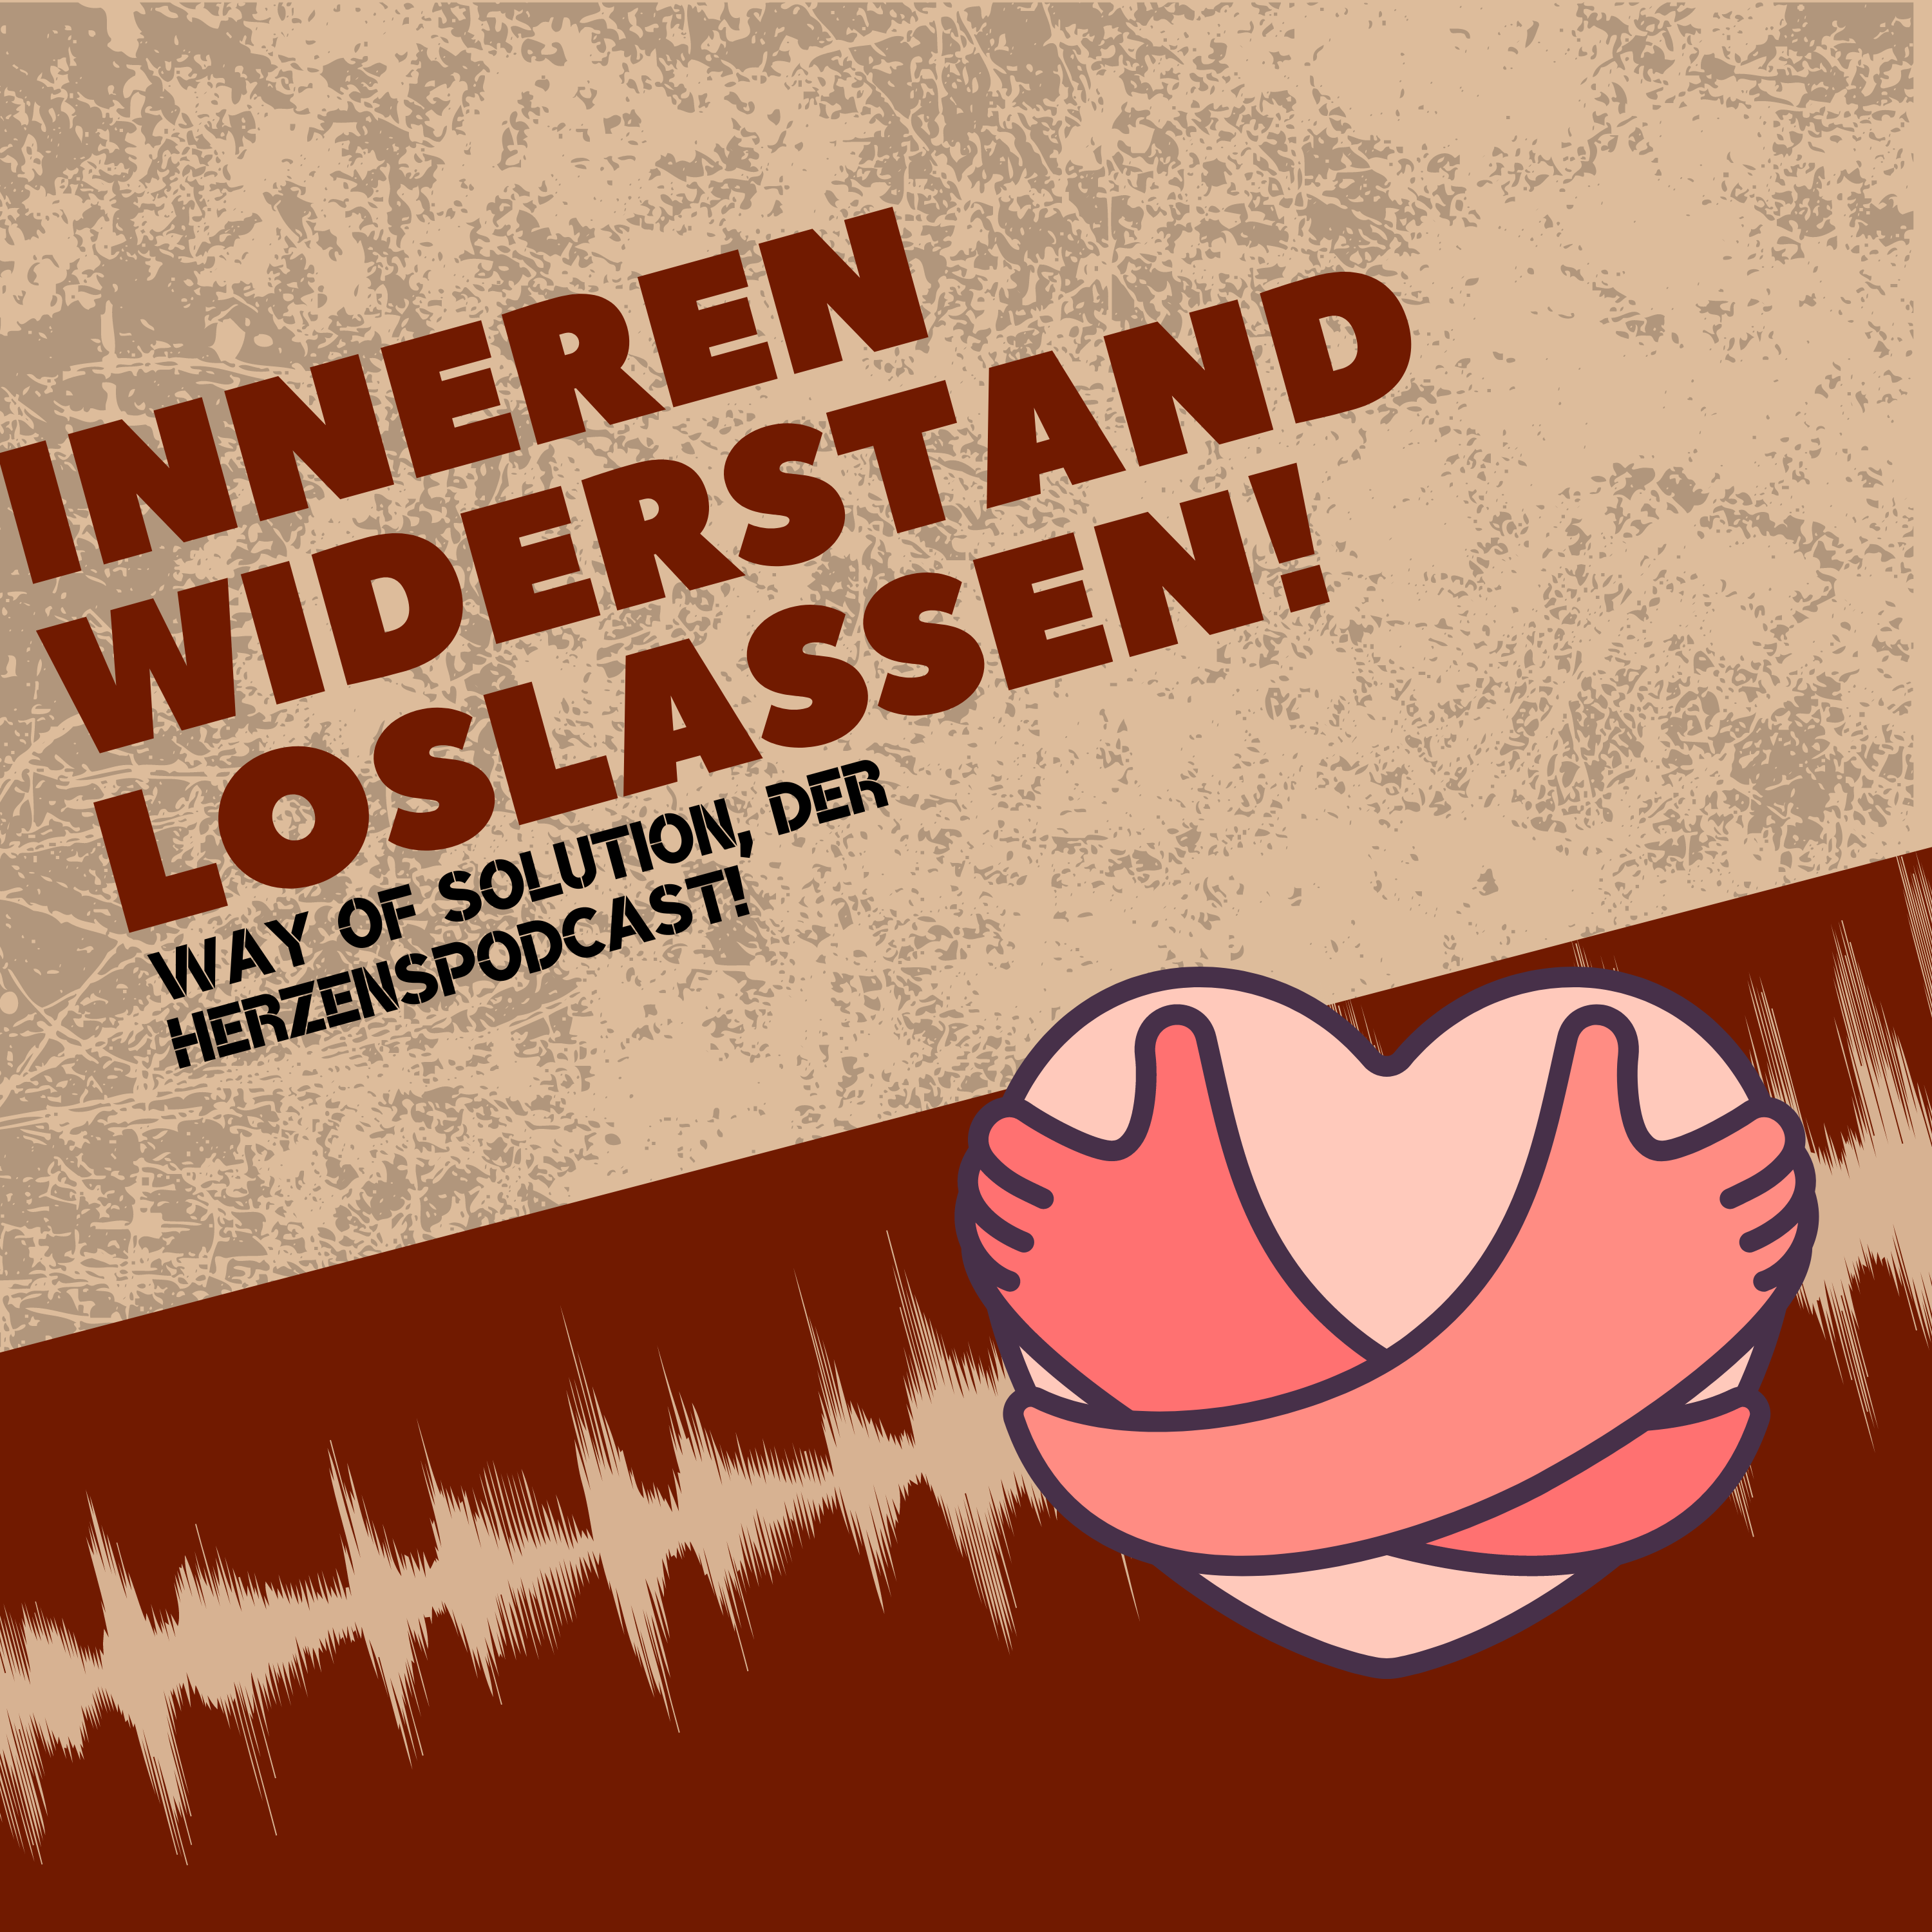 Read more about the article Widerstand los lassen